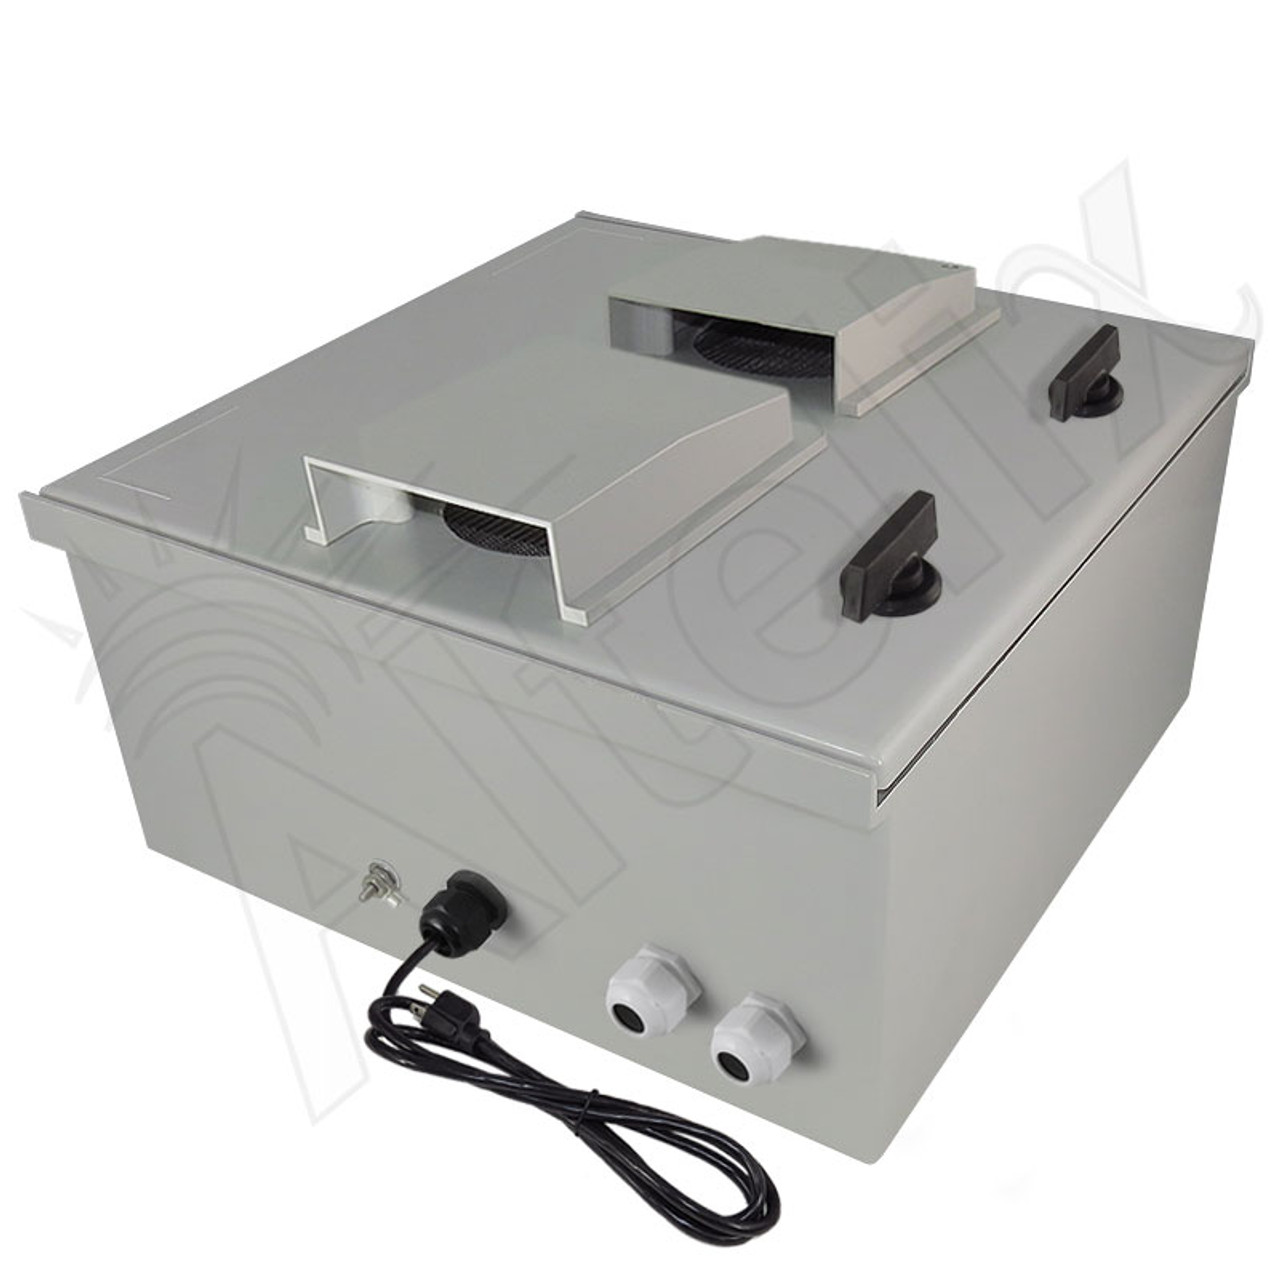 Altelix 16x16x8 Vented Fiberglass Weatherproof NEMA Enclosure with Cooling  Fan and 120 VAC Outlets & Power Cord